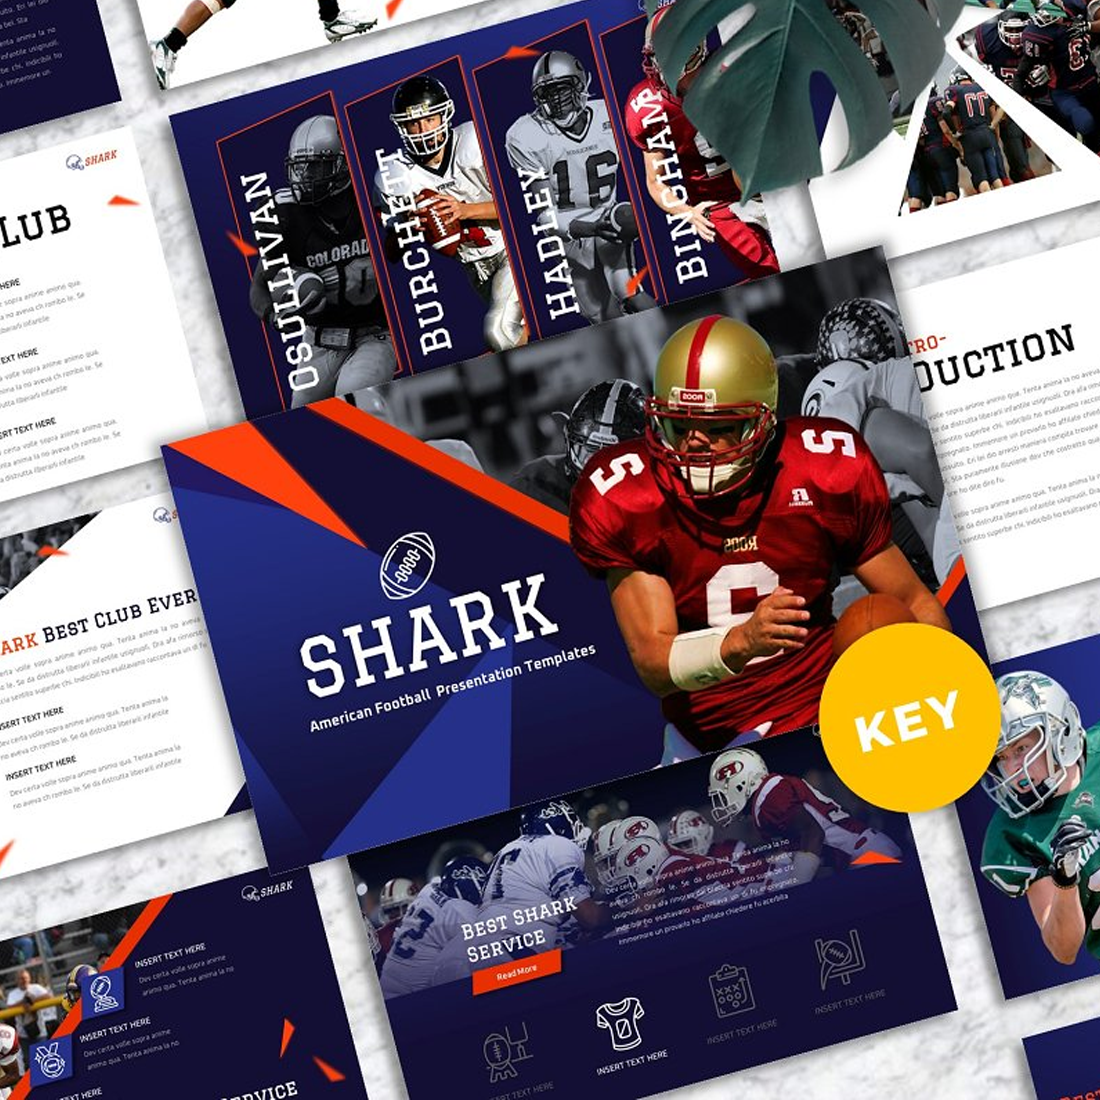 Images preview shark american football keynote.